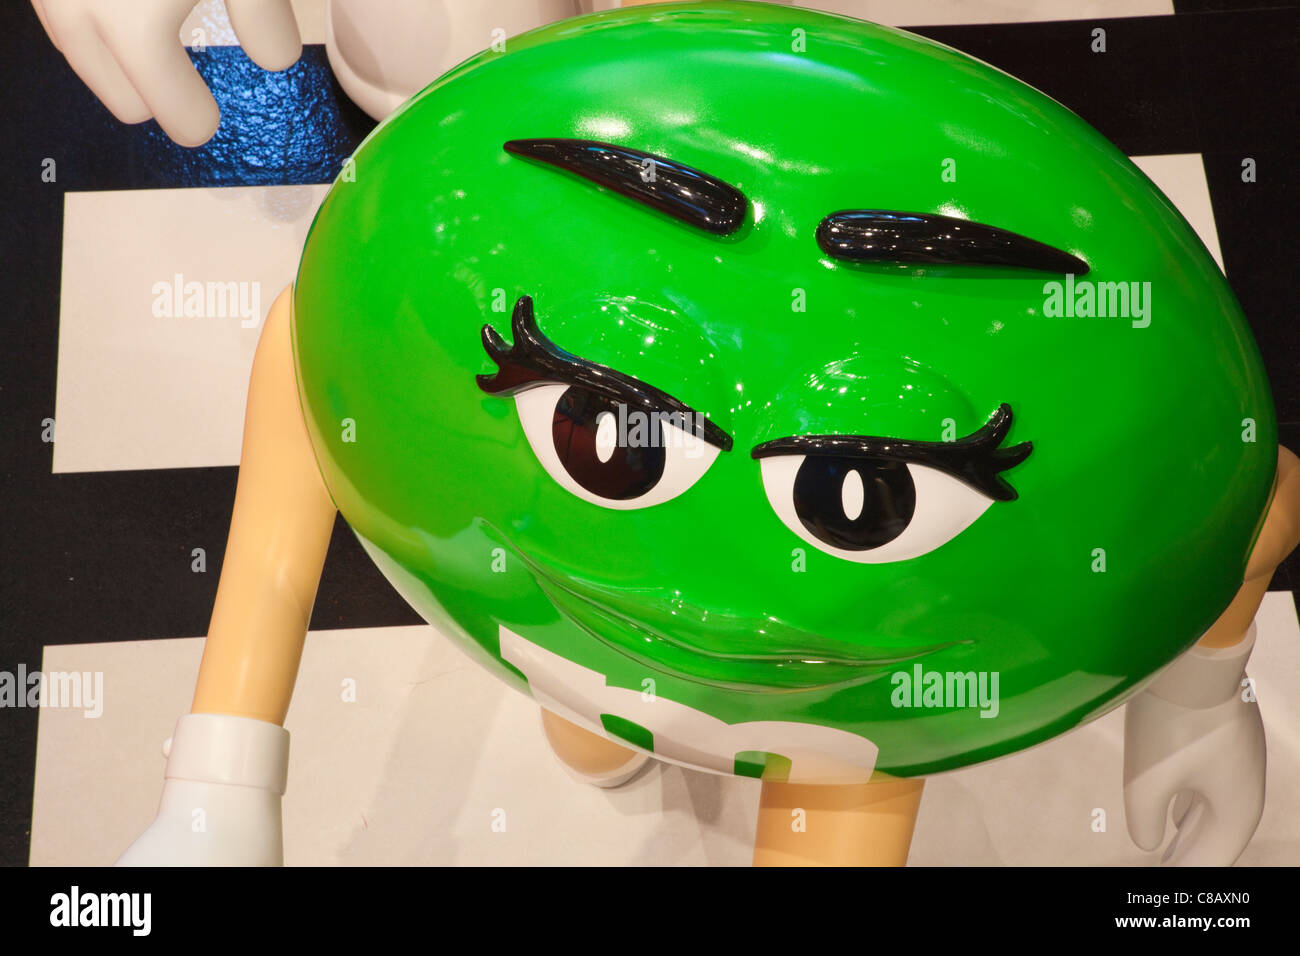 England, London, Leicester Square, innere Anzeige der M & M World Store Stockfoto